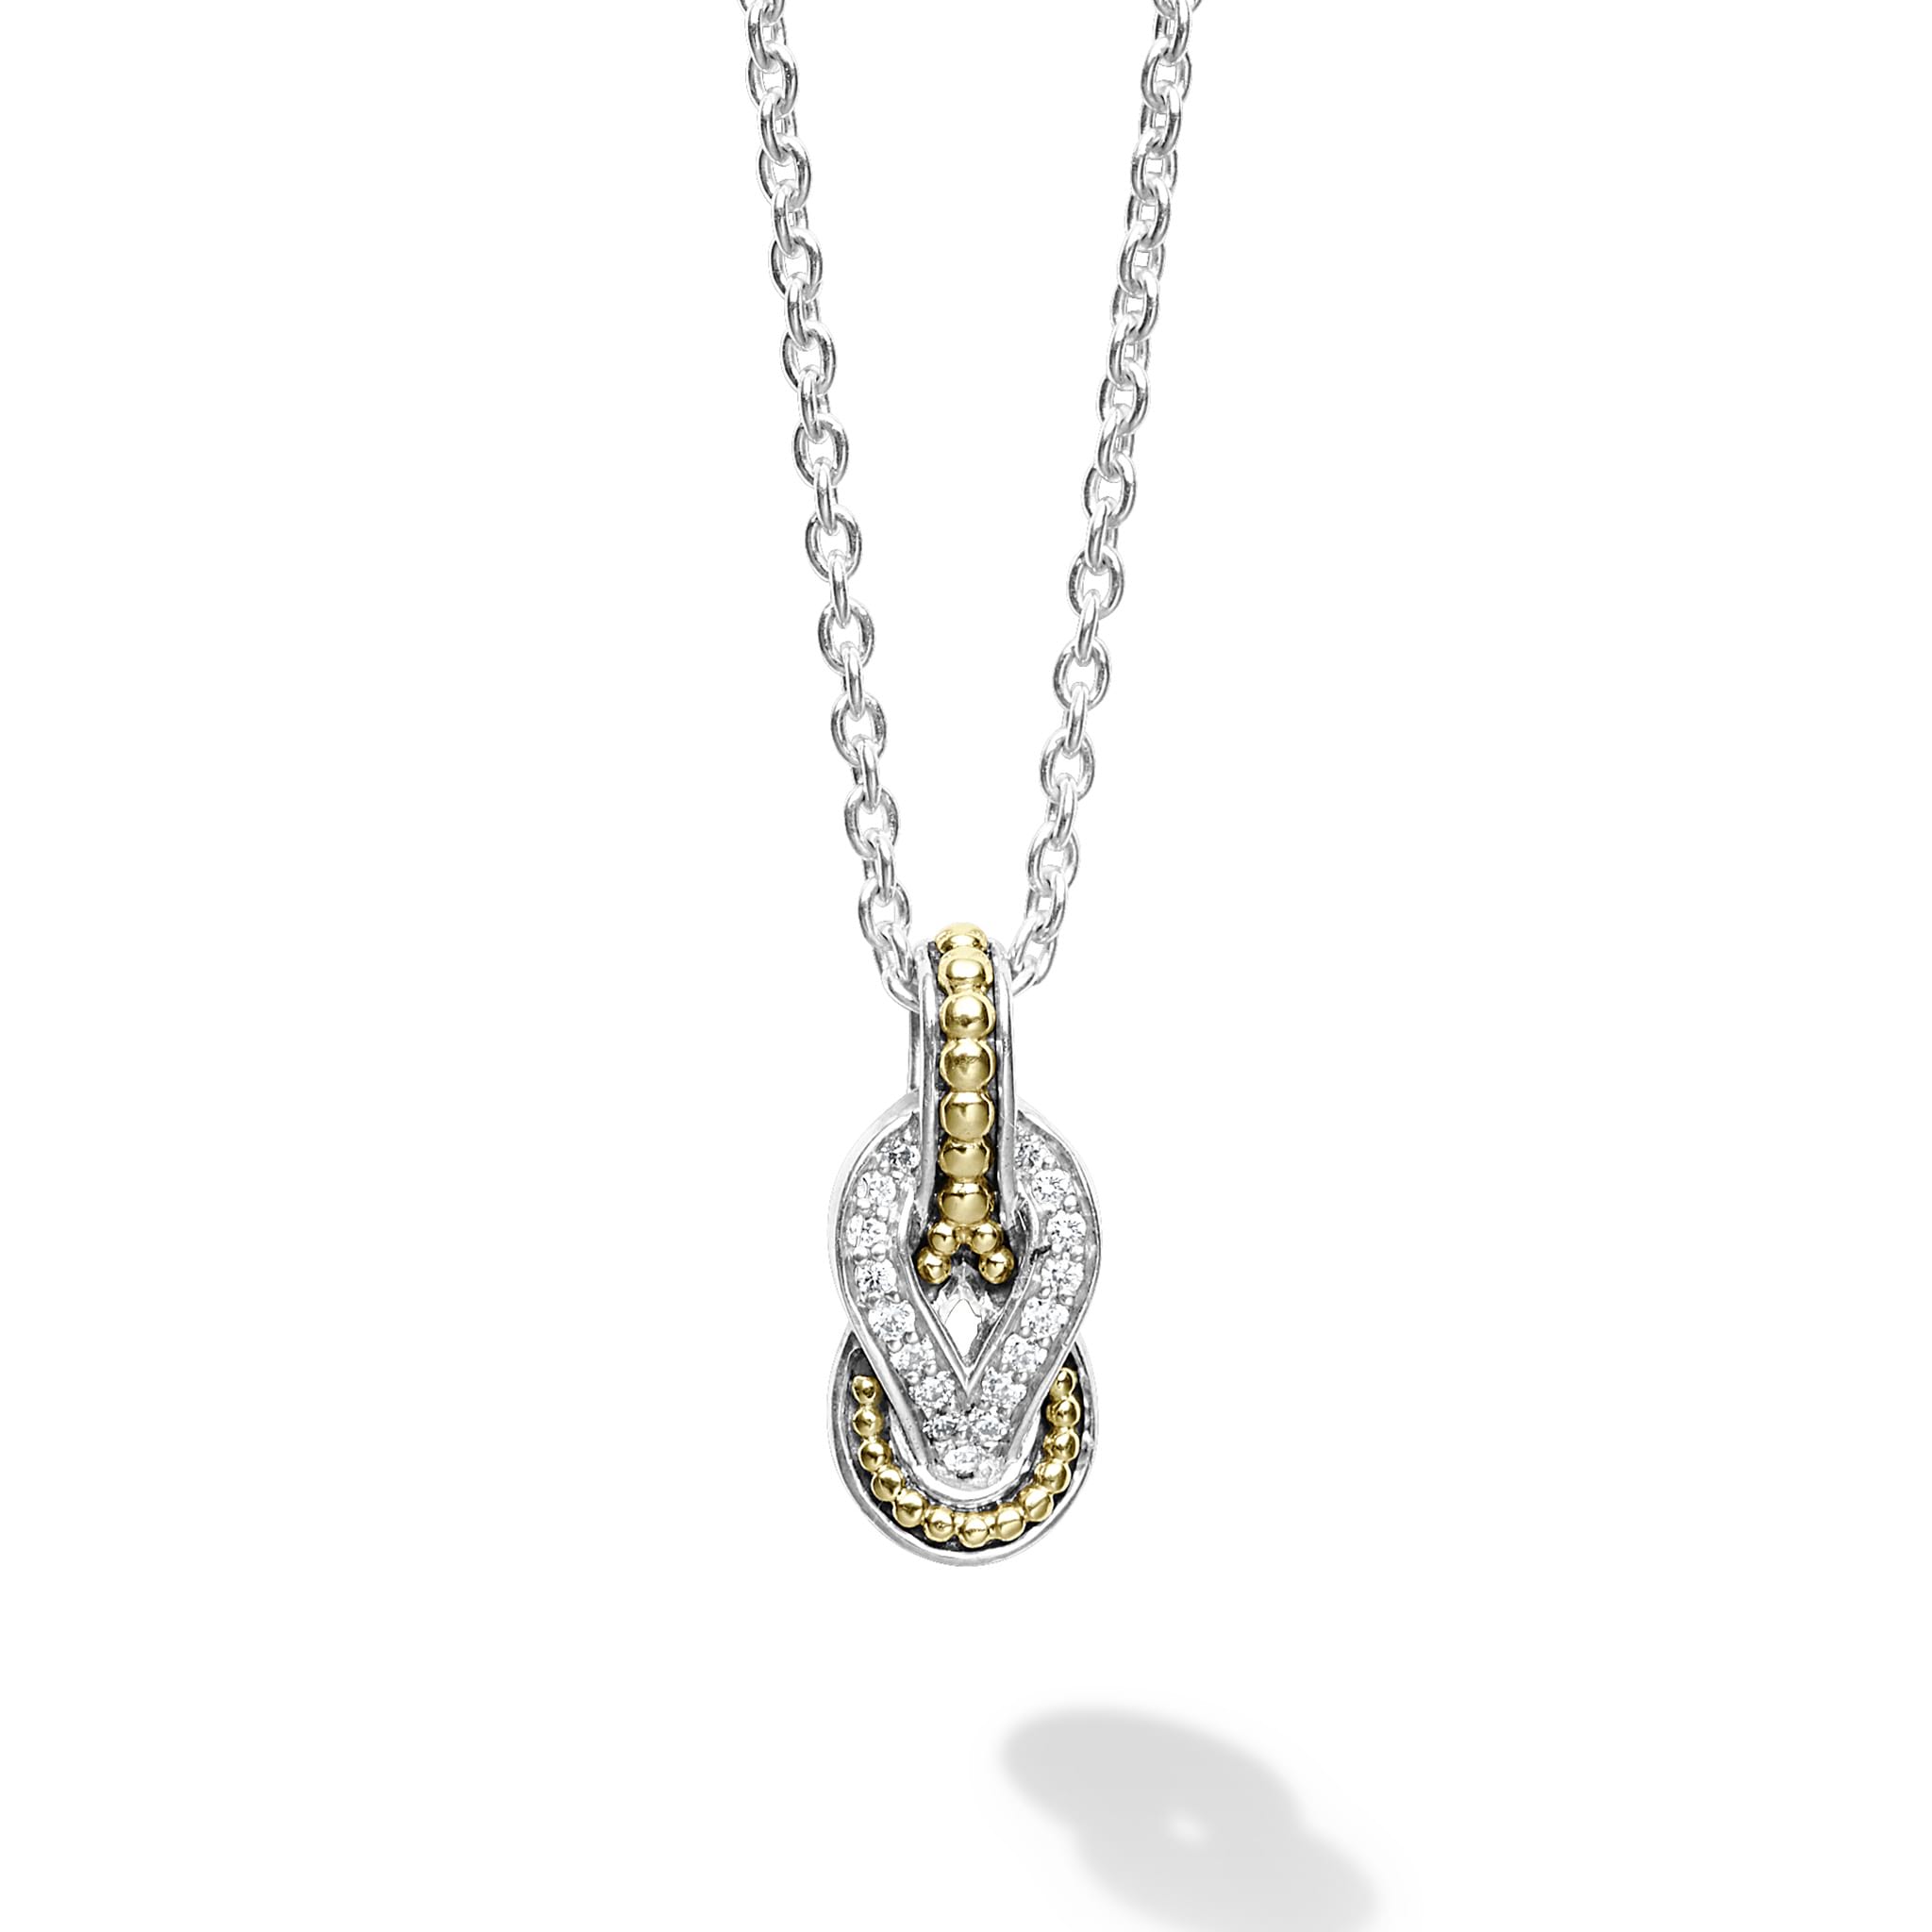 Gold and diamond necklace, 'Zip', 梵克雅寶 'Zip' 黃金及鑽石項鏈, Magnificent Jewels  and Noble Jewels, 2023